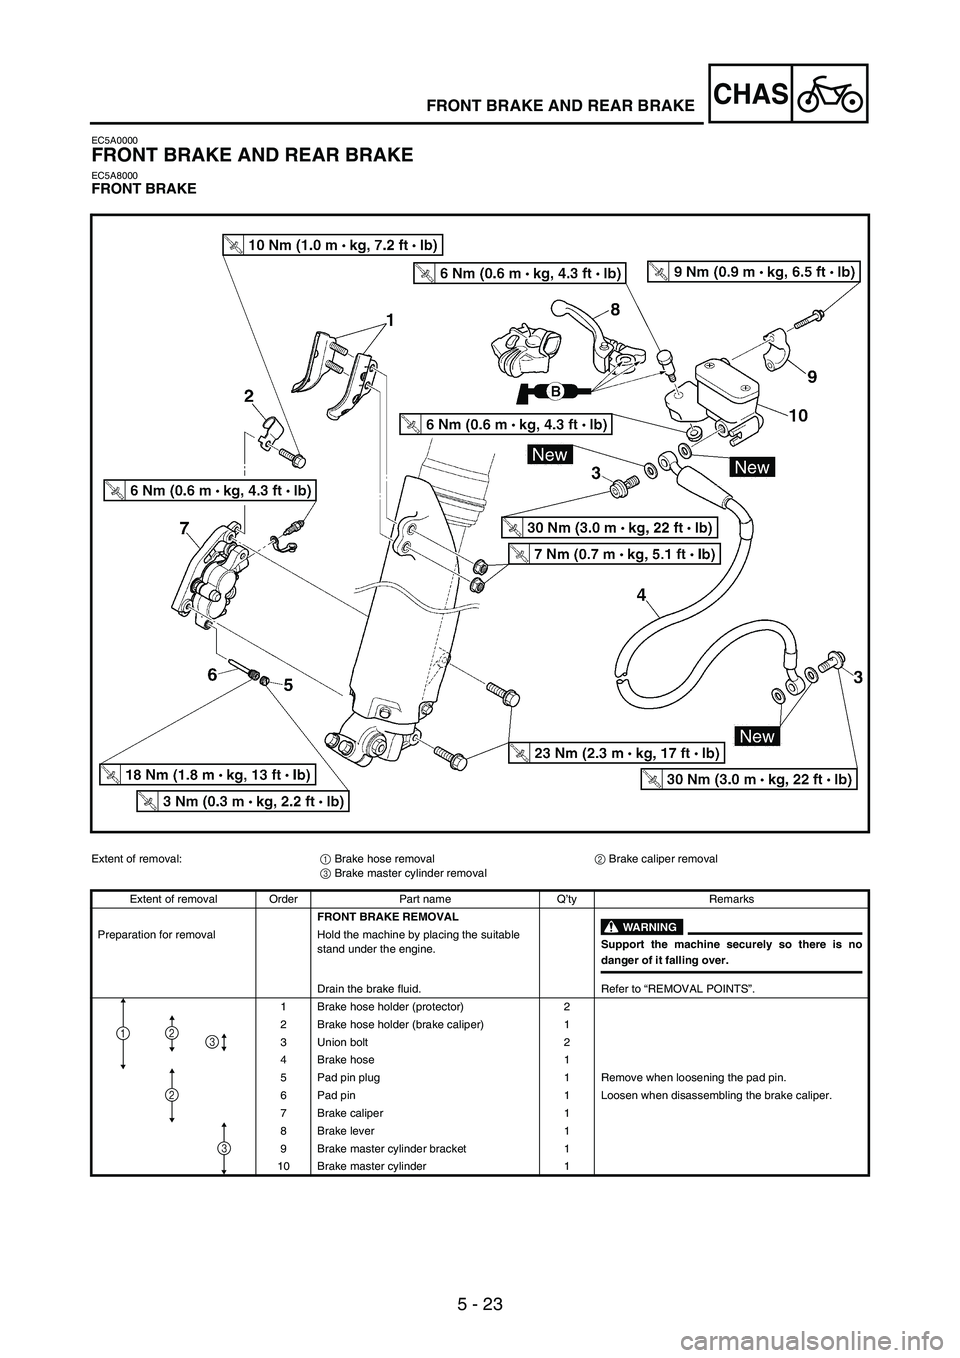 YAMAHA WR 250F 2005  Notices Demploi (in French) 5 - 23
CHASFRONT BRAKE AND REAR BRAKE
EC5A0000
FRONT BRAKE AND REAR BRAKE
EC5A8000FRONT BRAKE
Extent of removal:
1 Brake hose removal
2 Brake caliper removal
3 Brake master cylinder removal
Extent of 